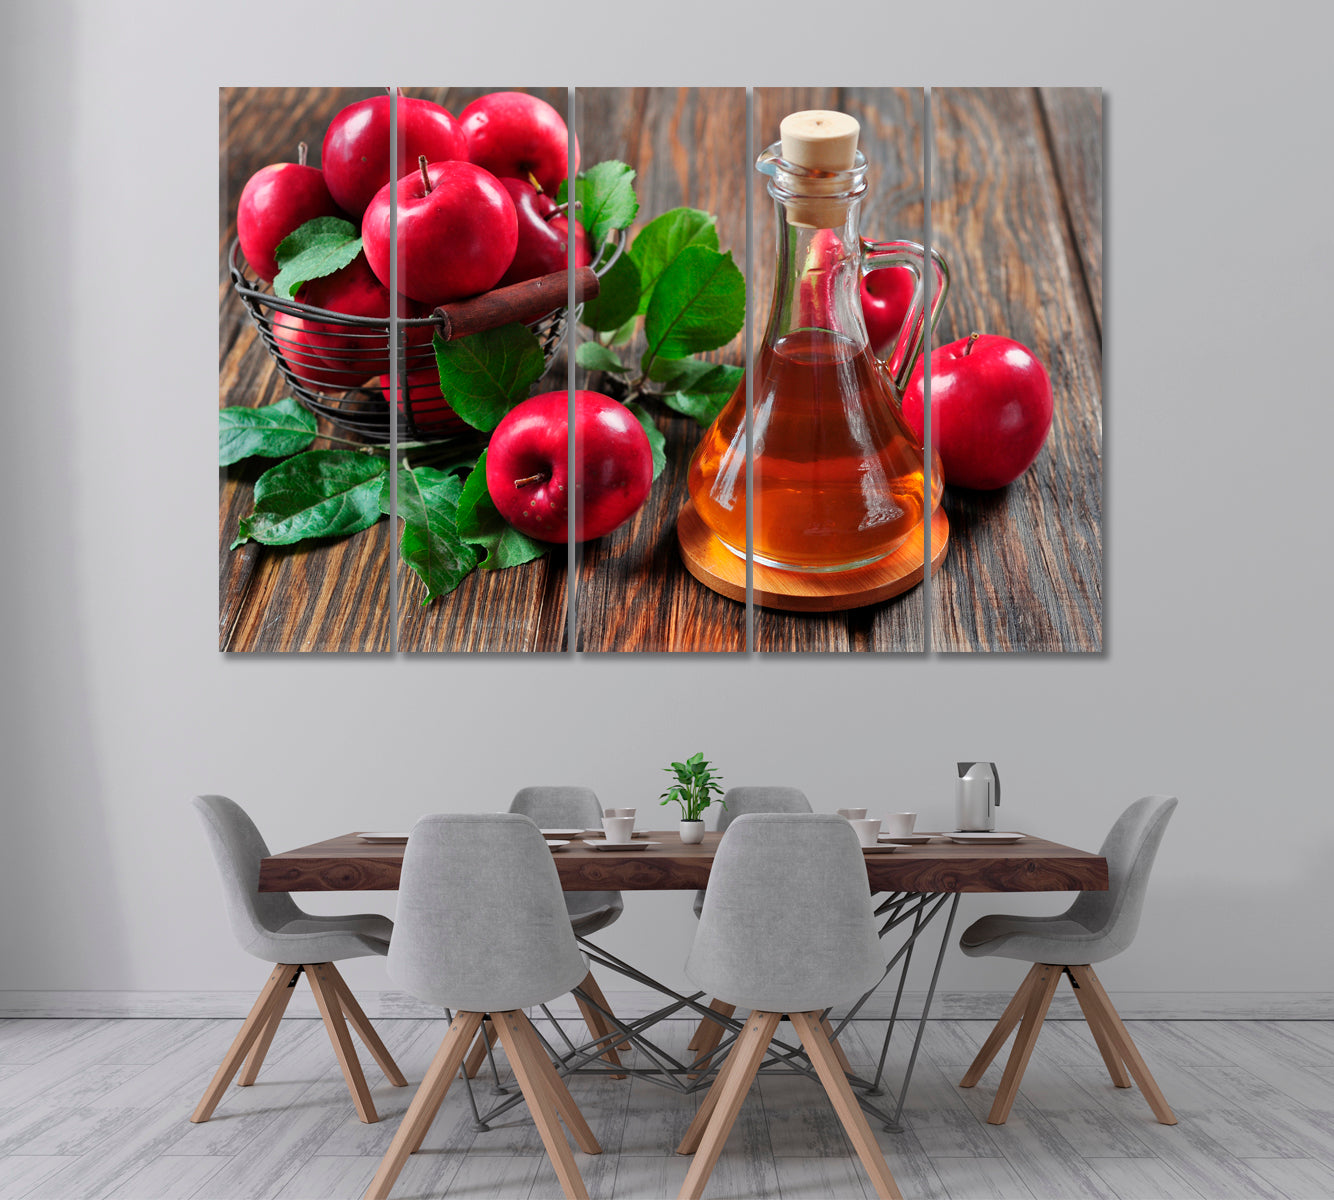 Apple Cider Vinegar and Basket with Apples Canvas Print ArtLexy 5 Panels 36"x24" inches 